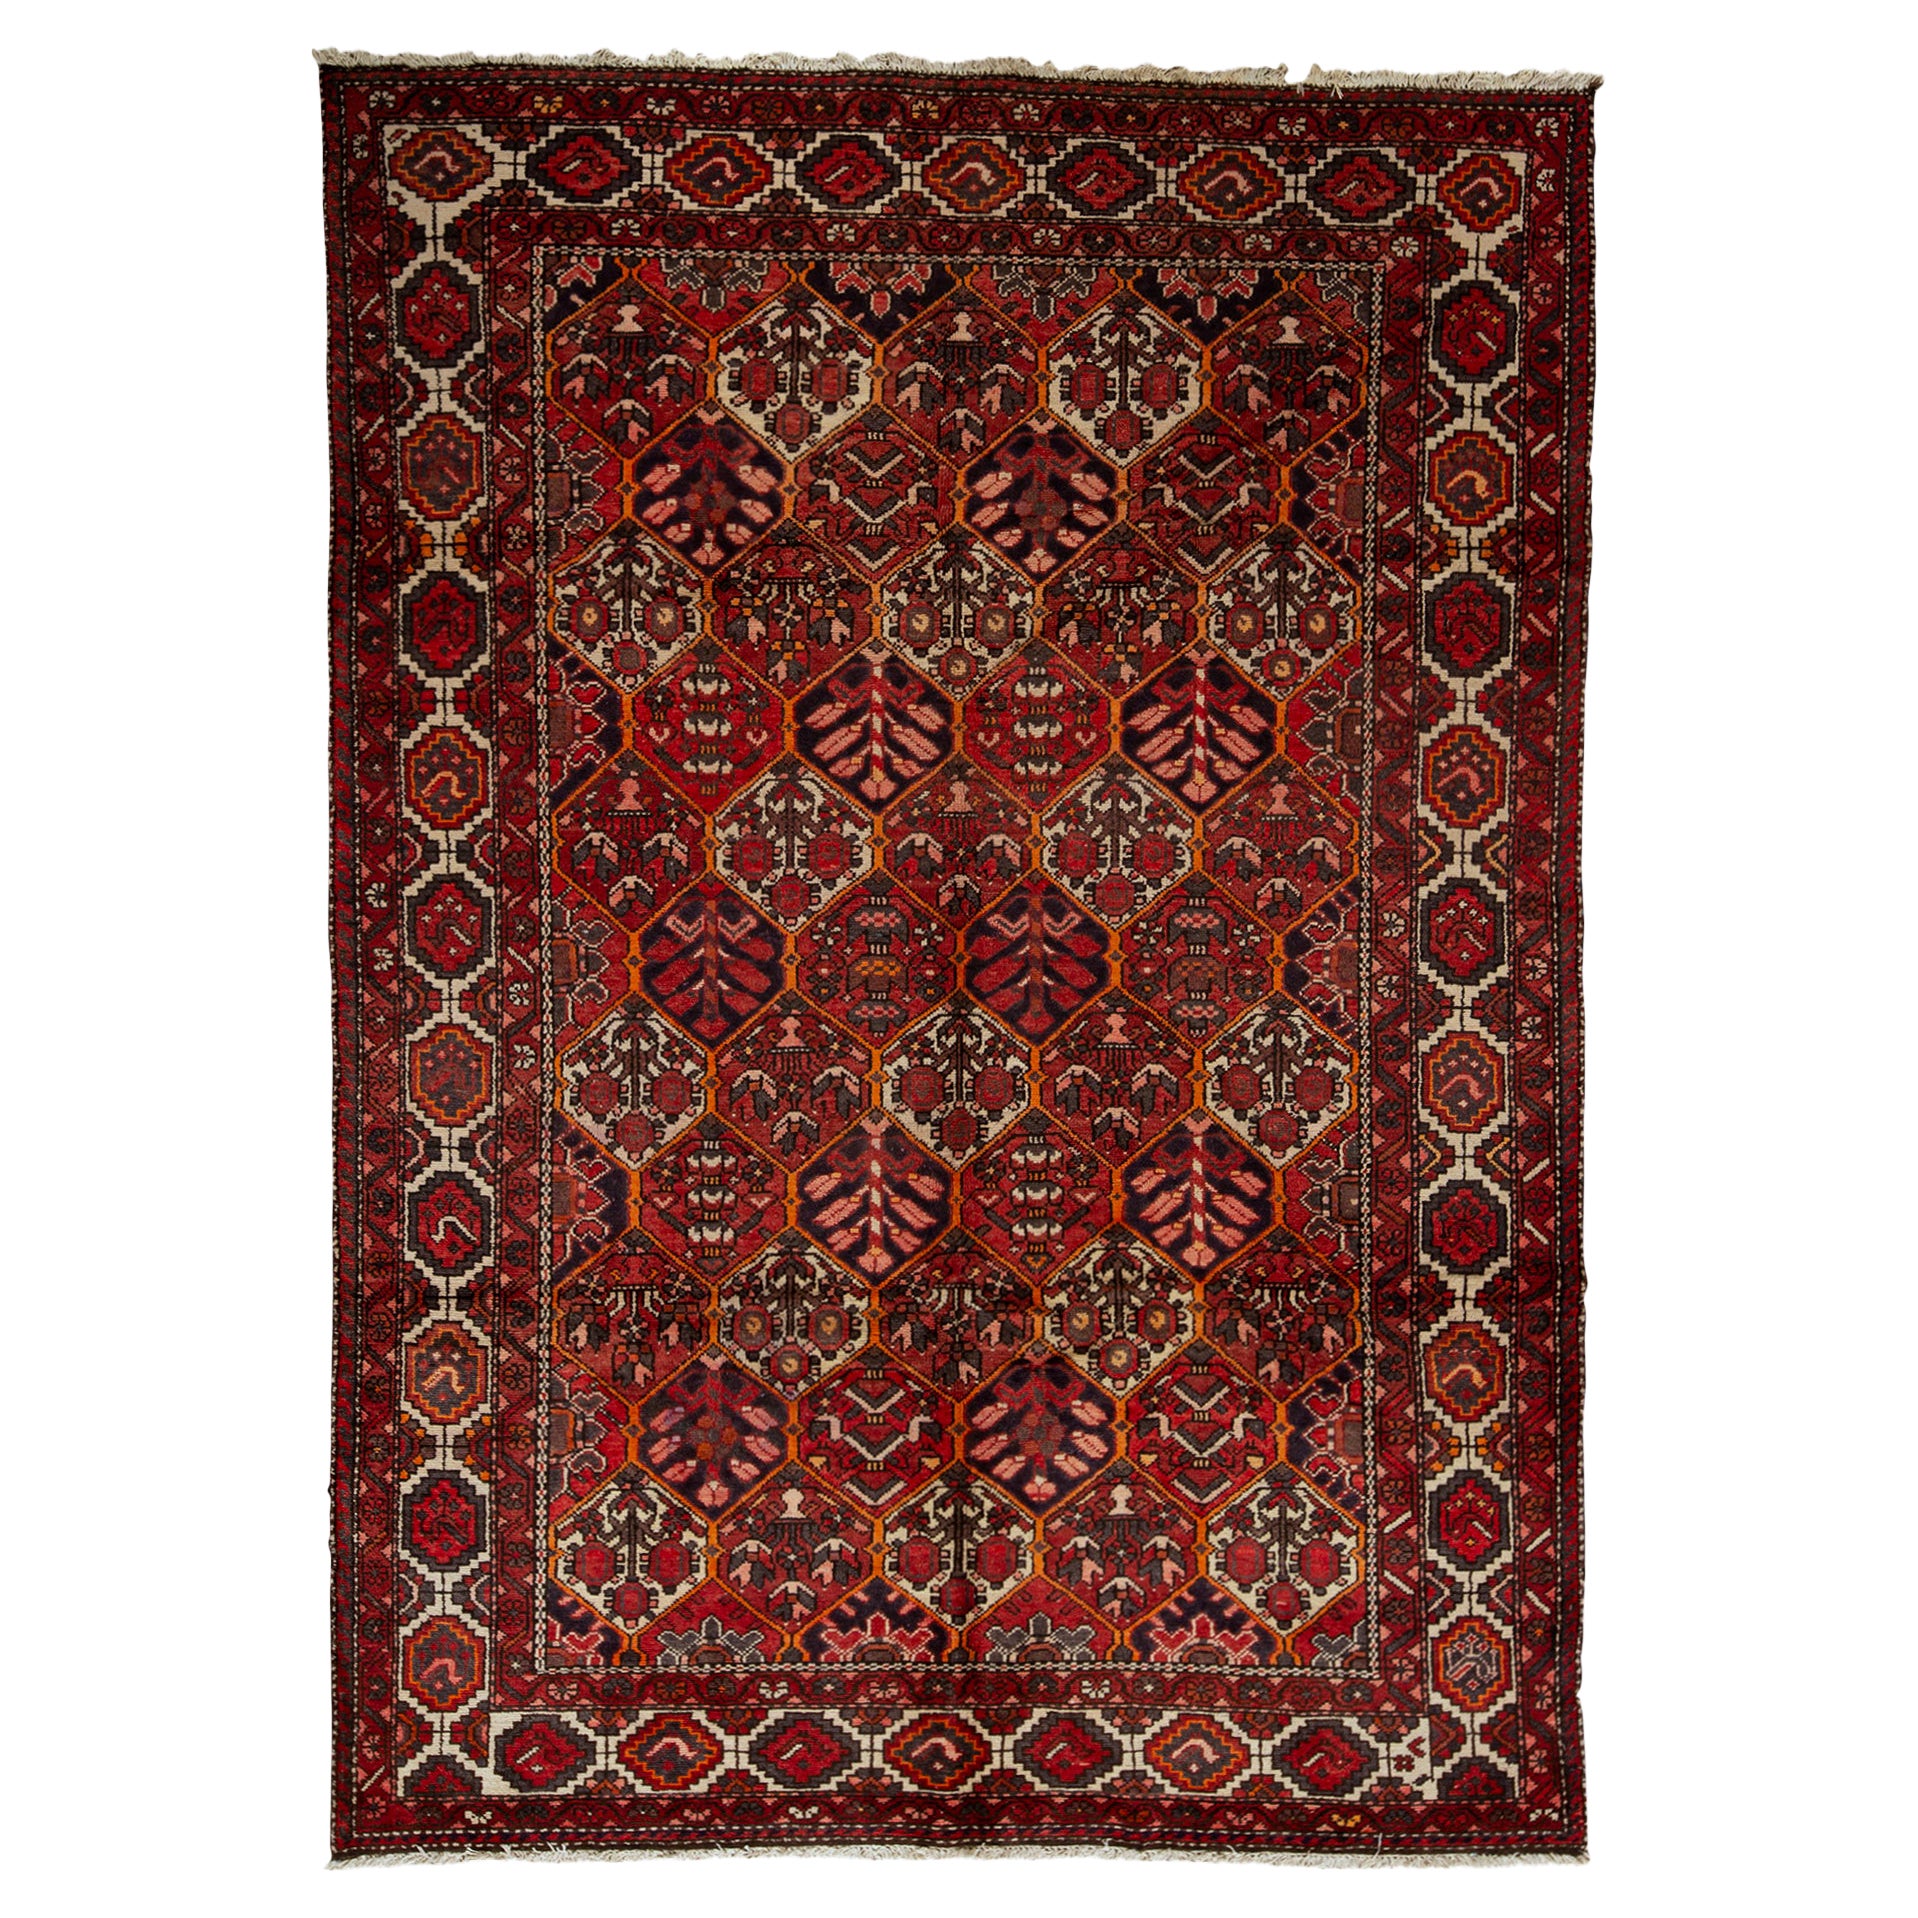   Antique Persian Fine Traditional Handwoven Luxury Wool Ivory / Red Rug